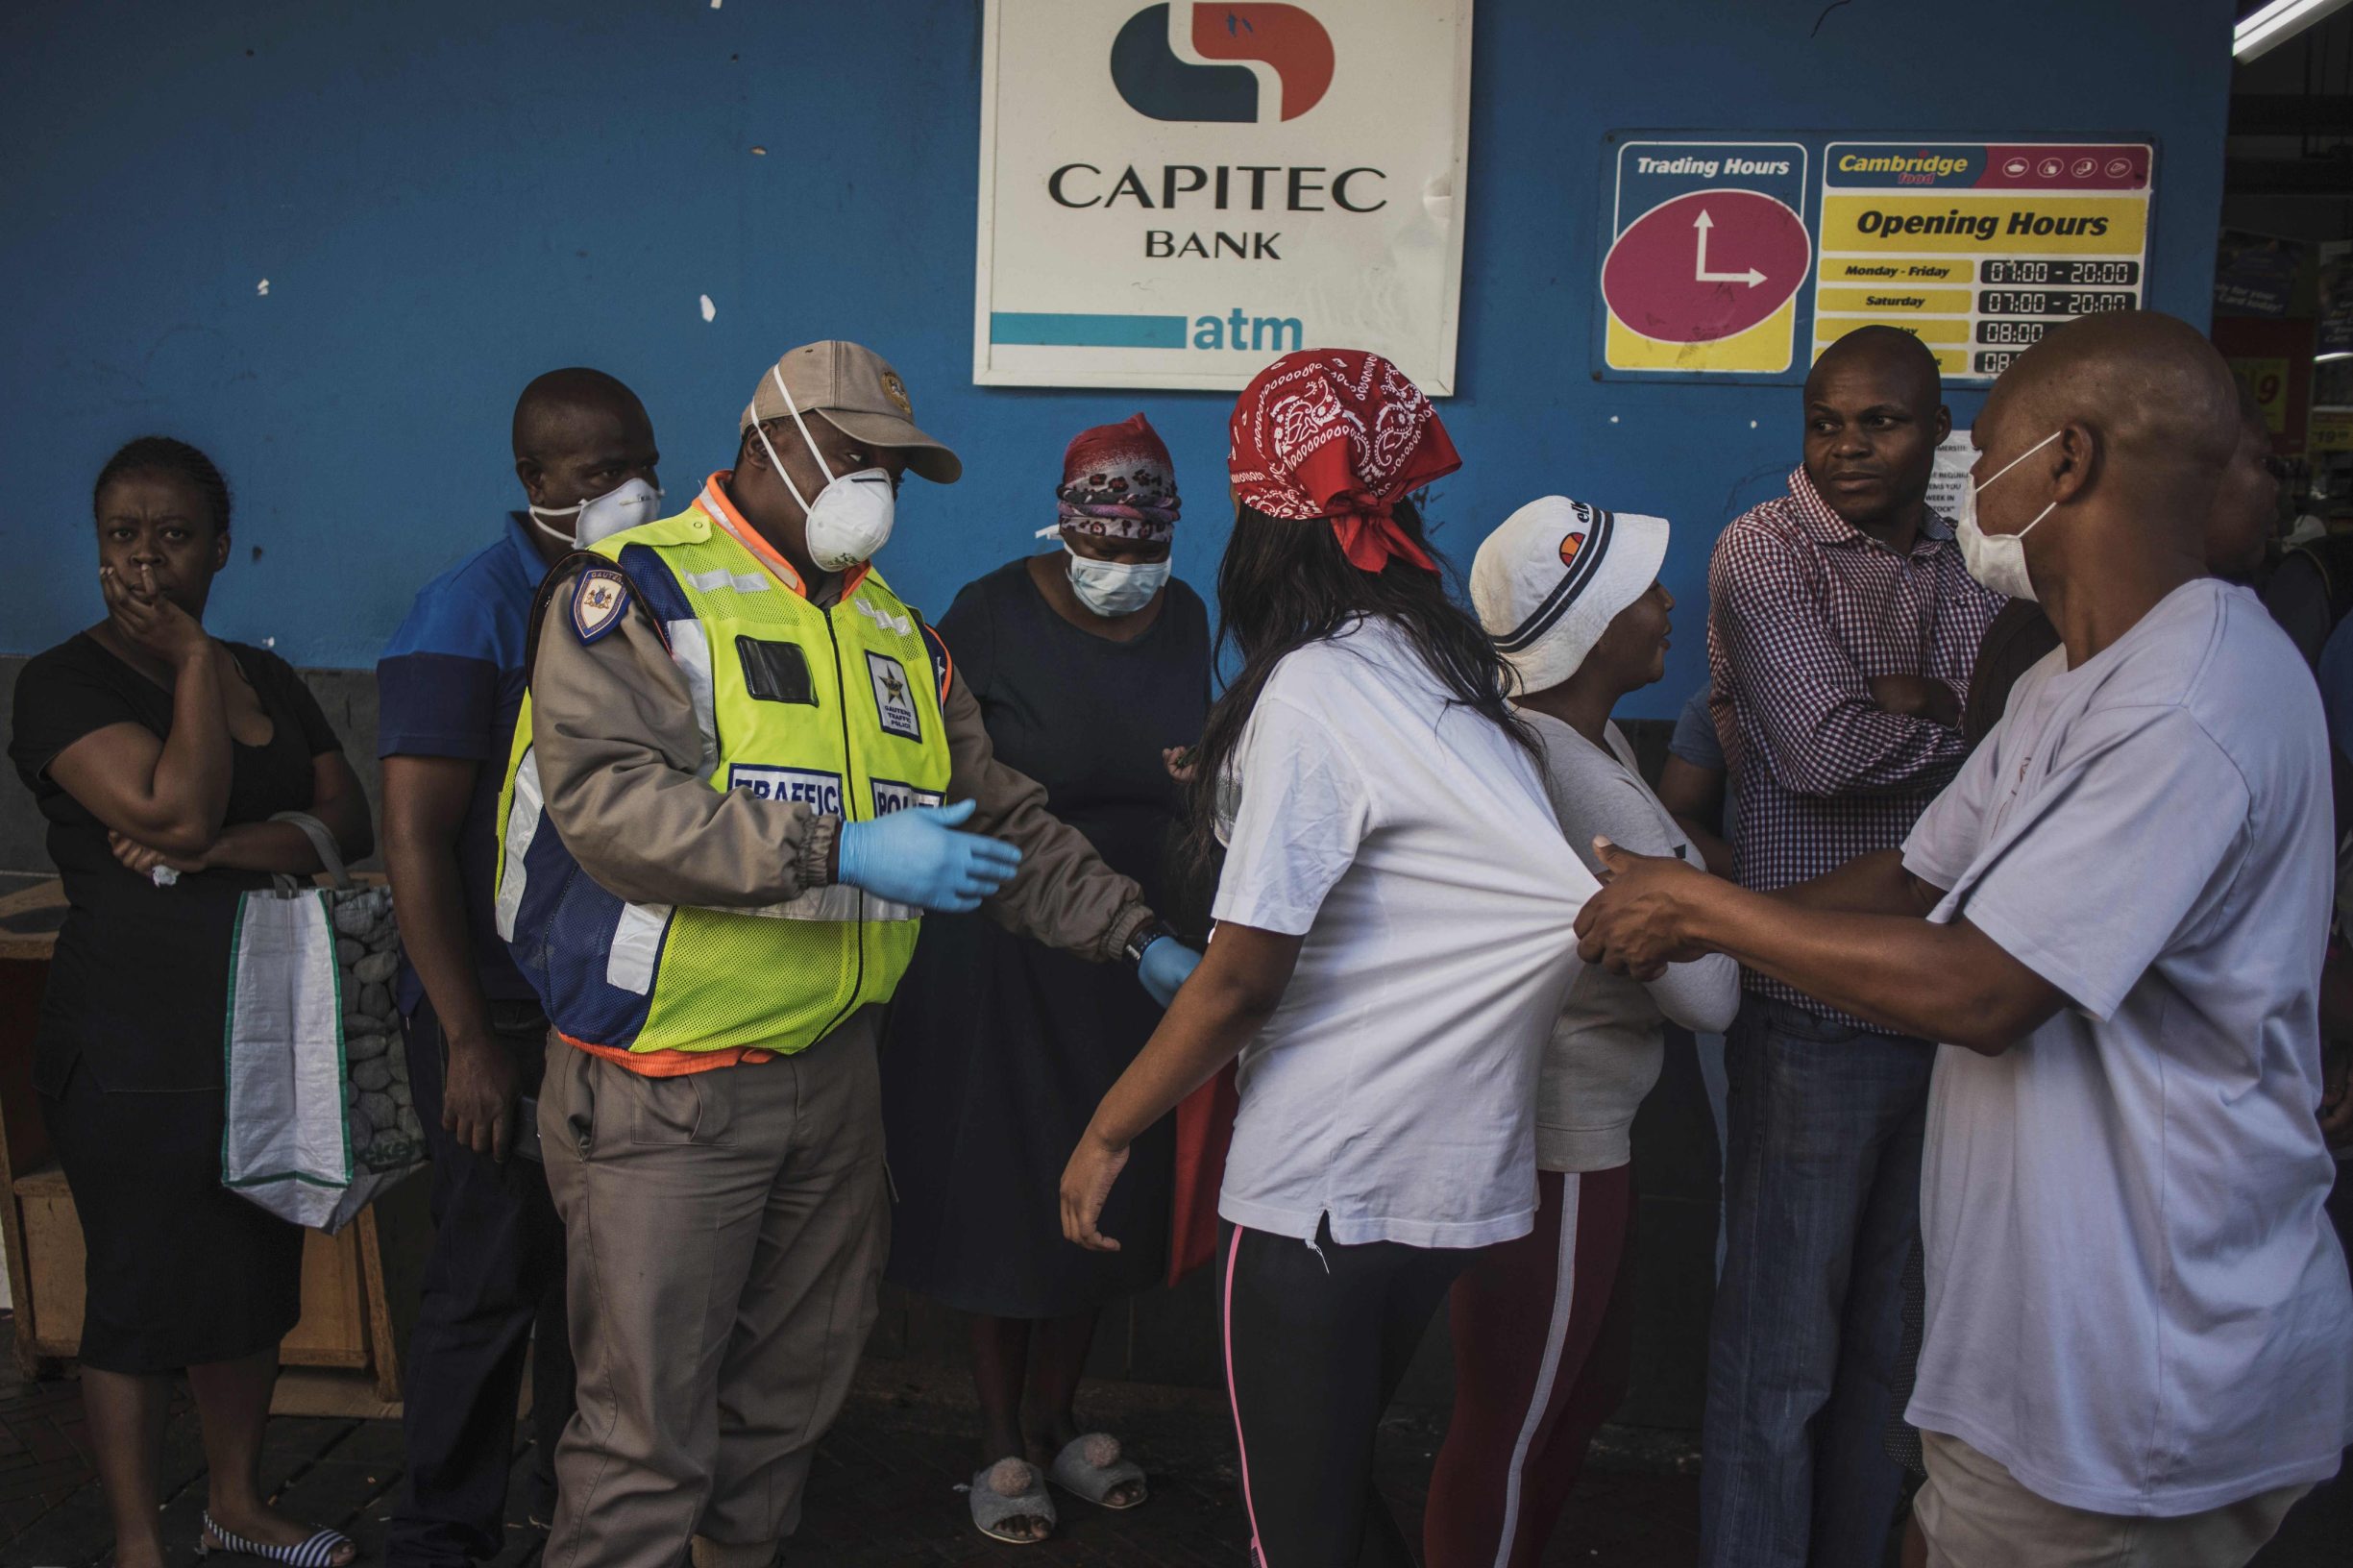 A South African uniformed Metro policeman (L) and a plainclothes one (R) try to enforce distancing outside a supermarket in Hillbrow, Johannesburg, on March 27, 2020 where several dozens of customers are queuing for food without respecting the minimum safety distance. - South Africa came under a nationwide lockdown on March 27, 2020, joining other African countries imposing strict curfews and shutdowns in an attempt to halt the spread of the COVID-19 coronavirus across the continent. (Photo by MARCO LONGARI / AFP)